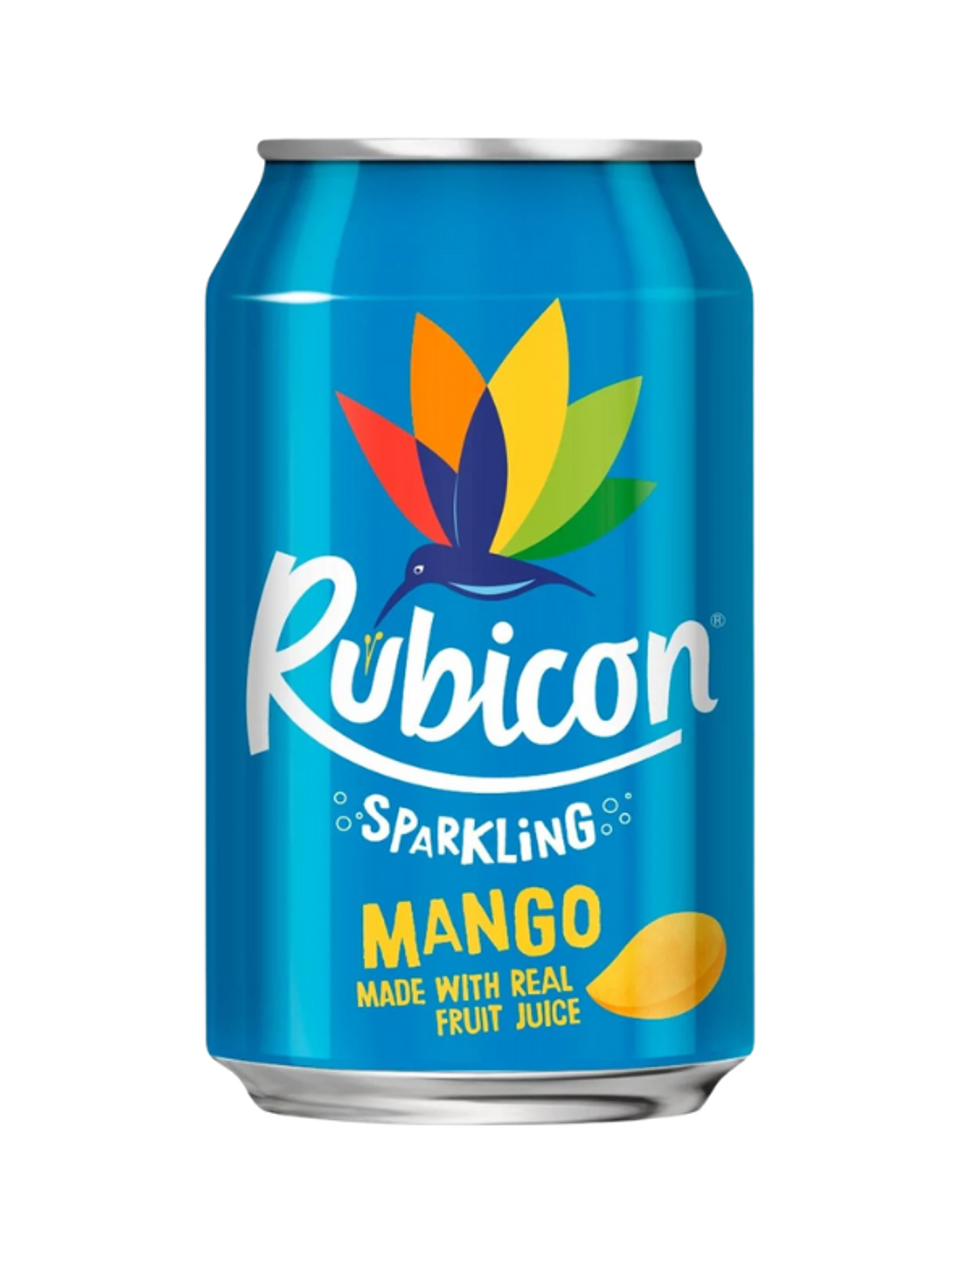 Rubicon Sparkling Mango 330ml RRP 50p CLEARANCE XL 39p or 3 for 99p